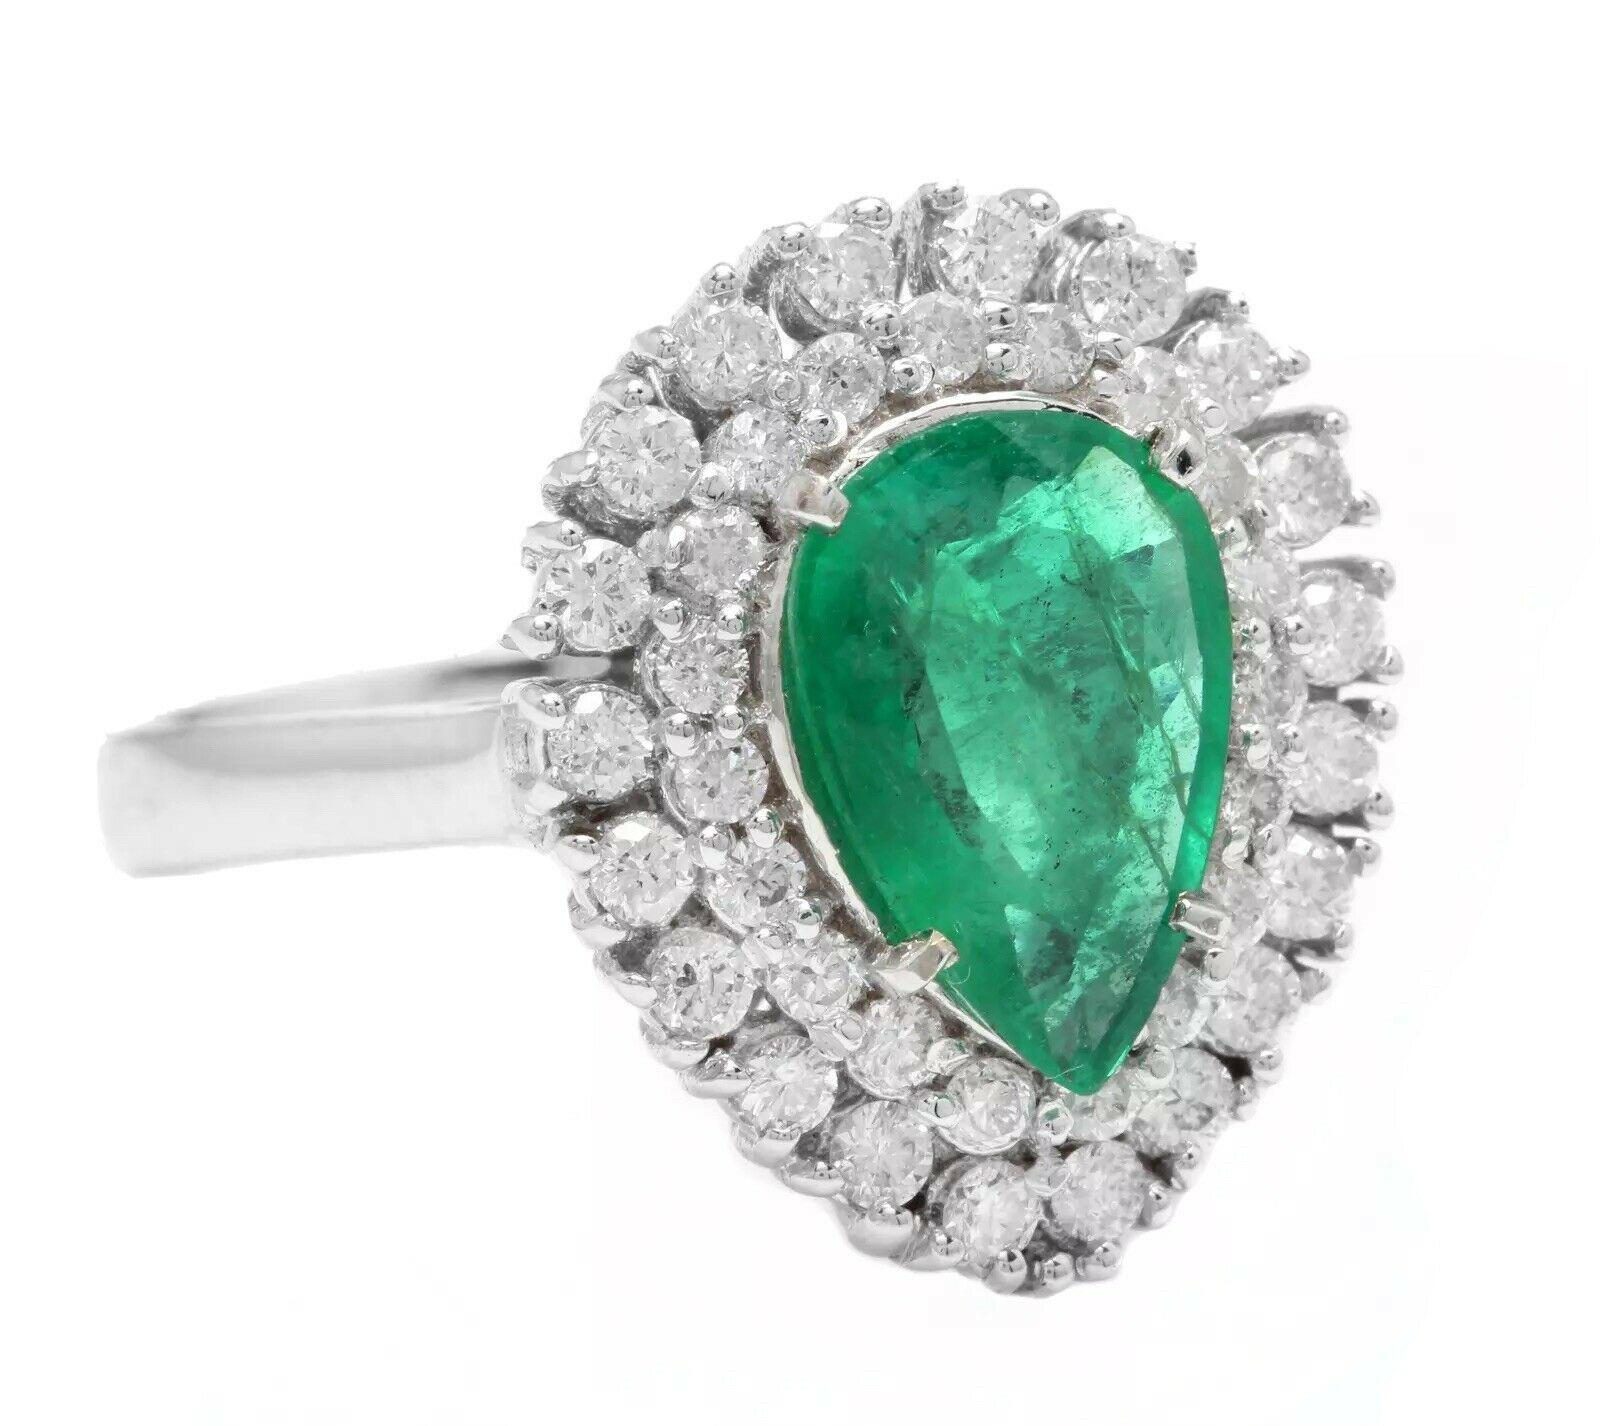 3. 70 Carats Natural Emerald and Diamond 14K Solid White Gold Ring

Total Natural Green Emerald Weight is: Approx. 3.00 Carats (transparent)

Emerald Measures: Approx. 10.80 x 7.25mm

Emerald Treatment: Oiling

Natural Round Diamonds Weight: Approx.